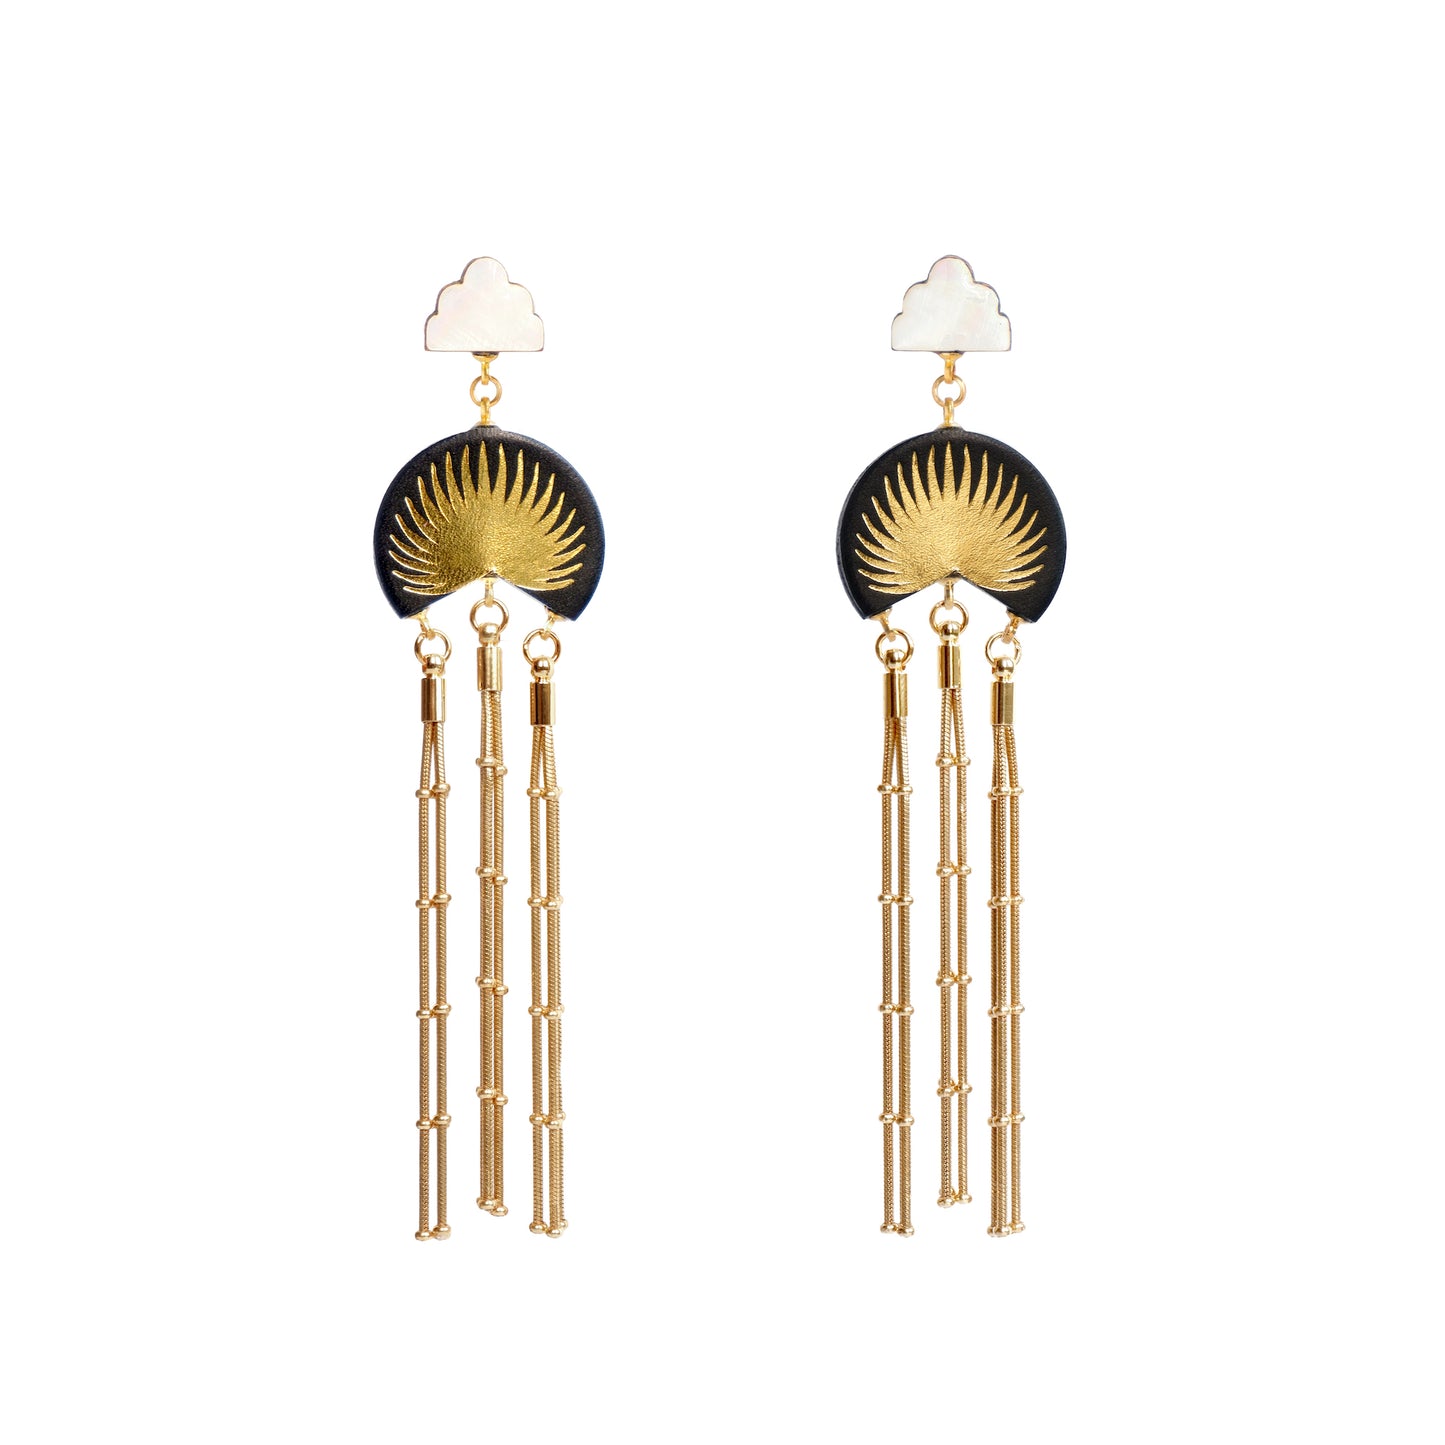 black leather medallion earrings, with gold palm tree print, gold tassels & mother of pearl cloud shade studs.